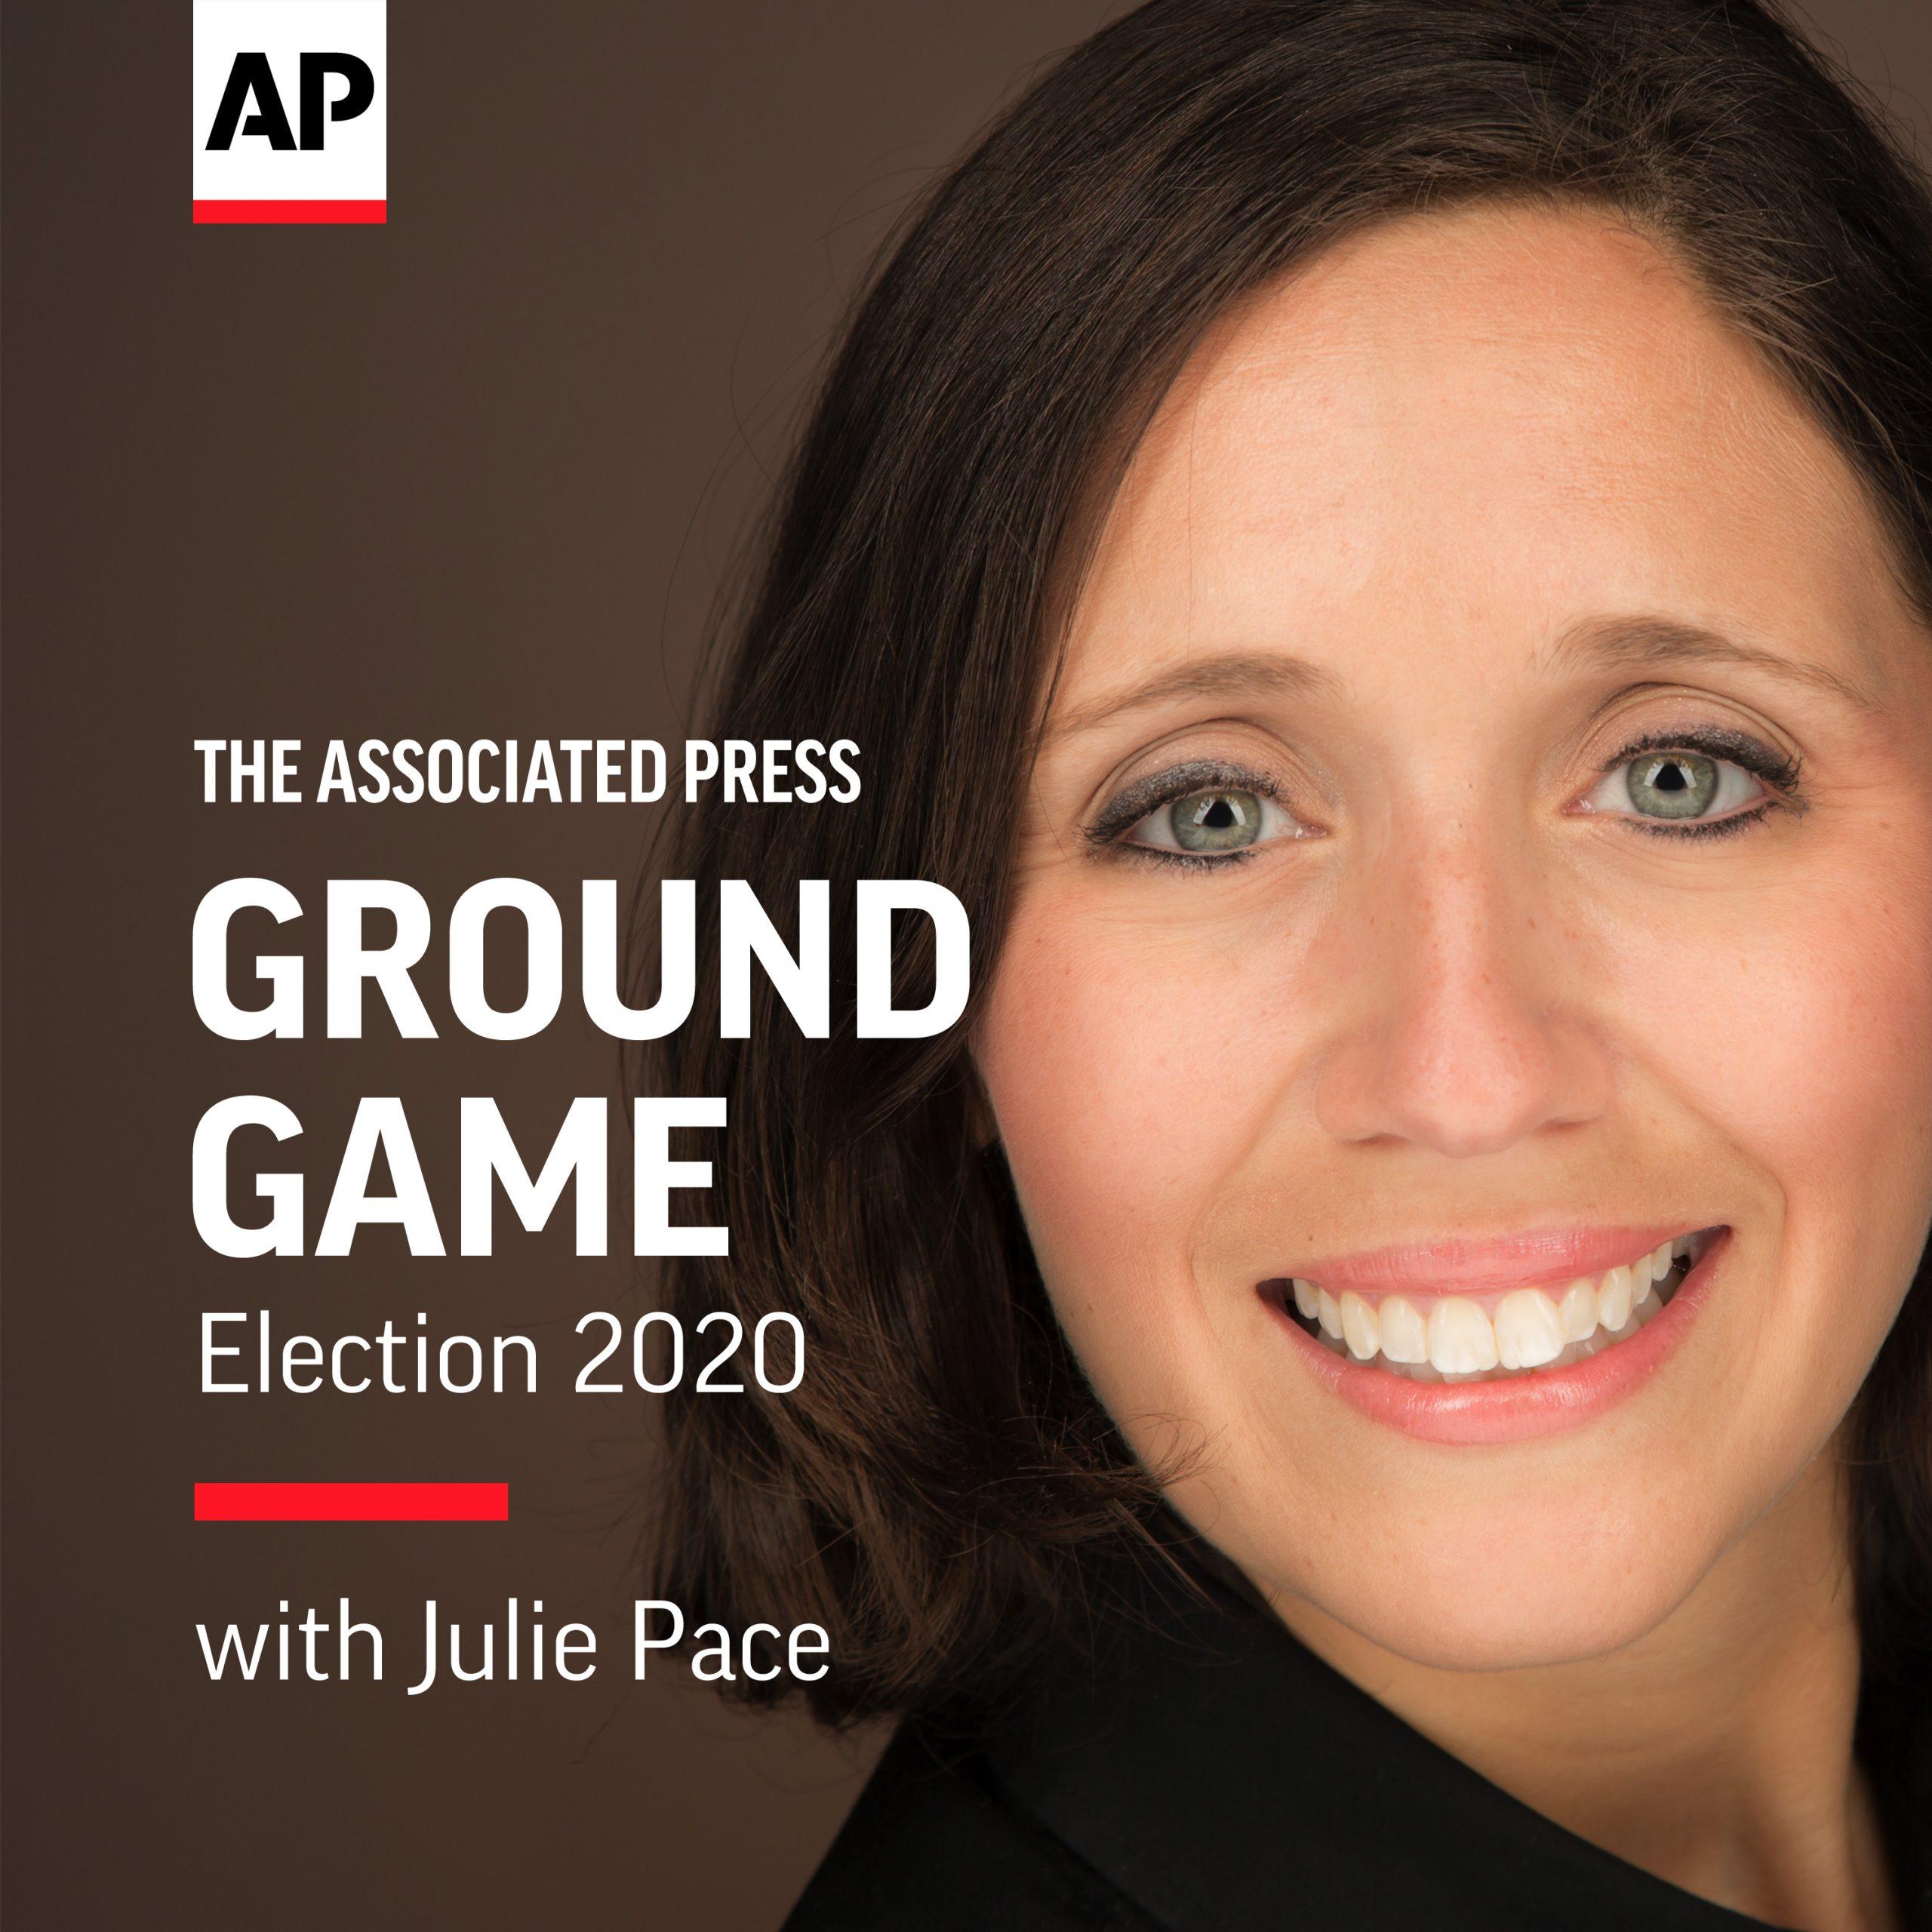 WESTWOOD ONE AND THE ASSOCIATED PRESS UNITE IN PODCAST PARTNERSHIP